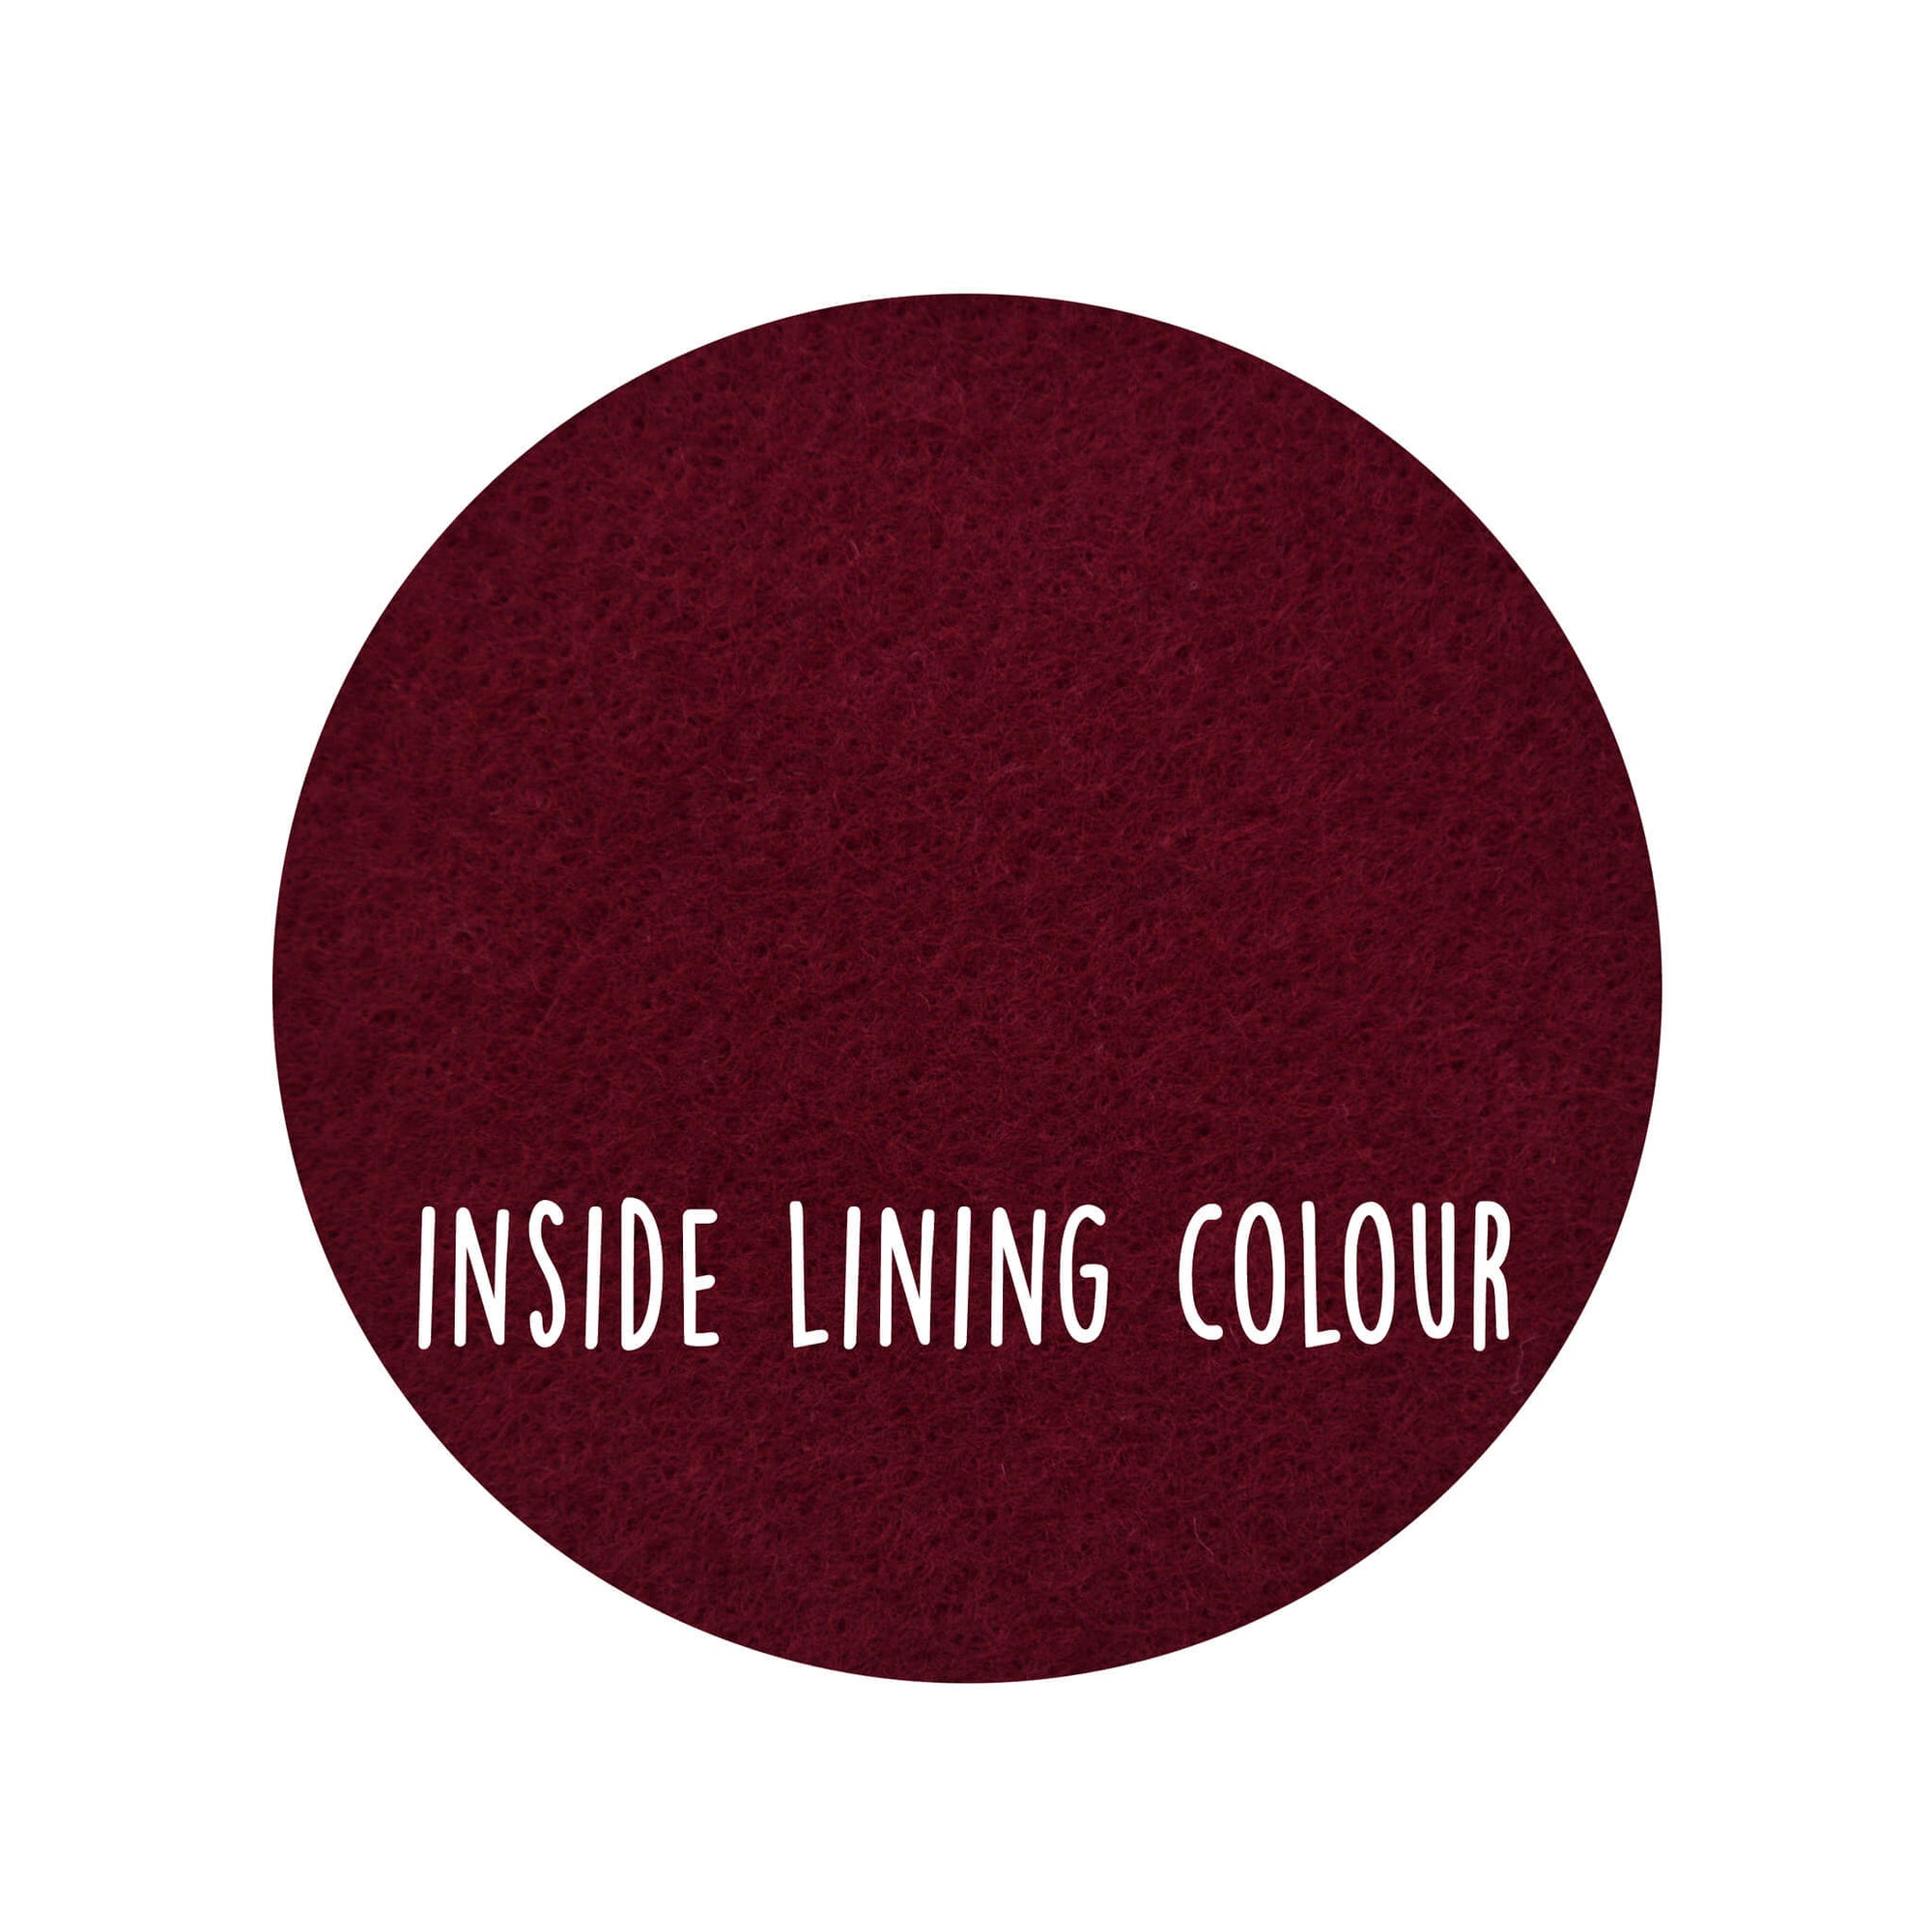 This image shows the burgundy colour of the lining of the product.